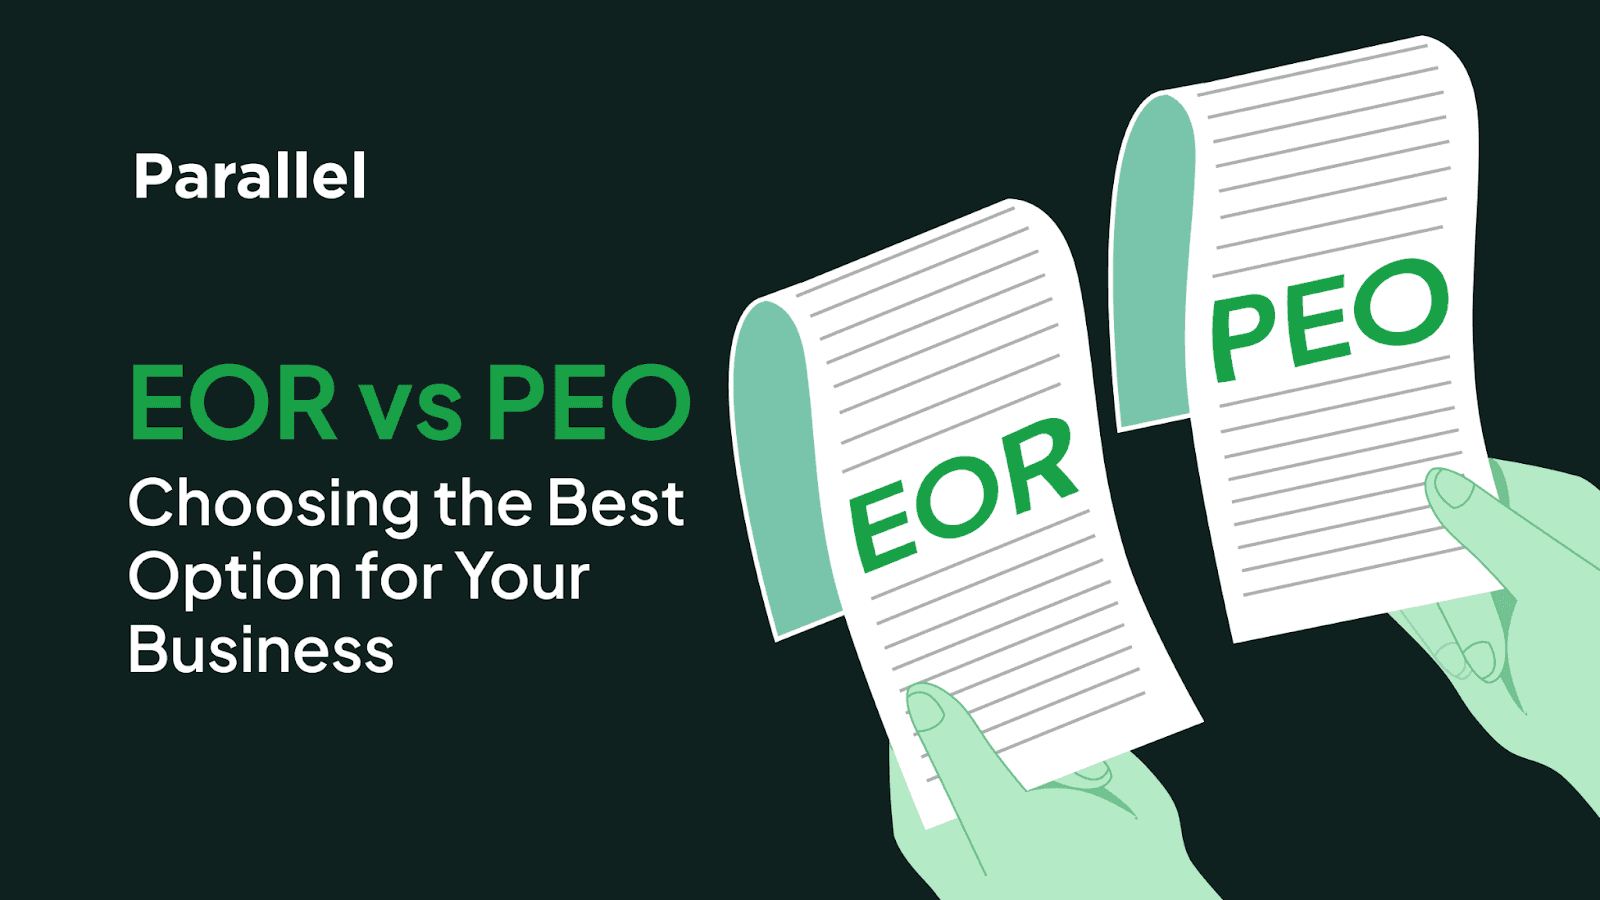 eor vs peo choosing the best option for your business 1